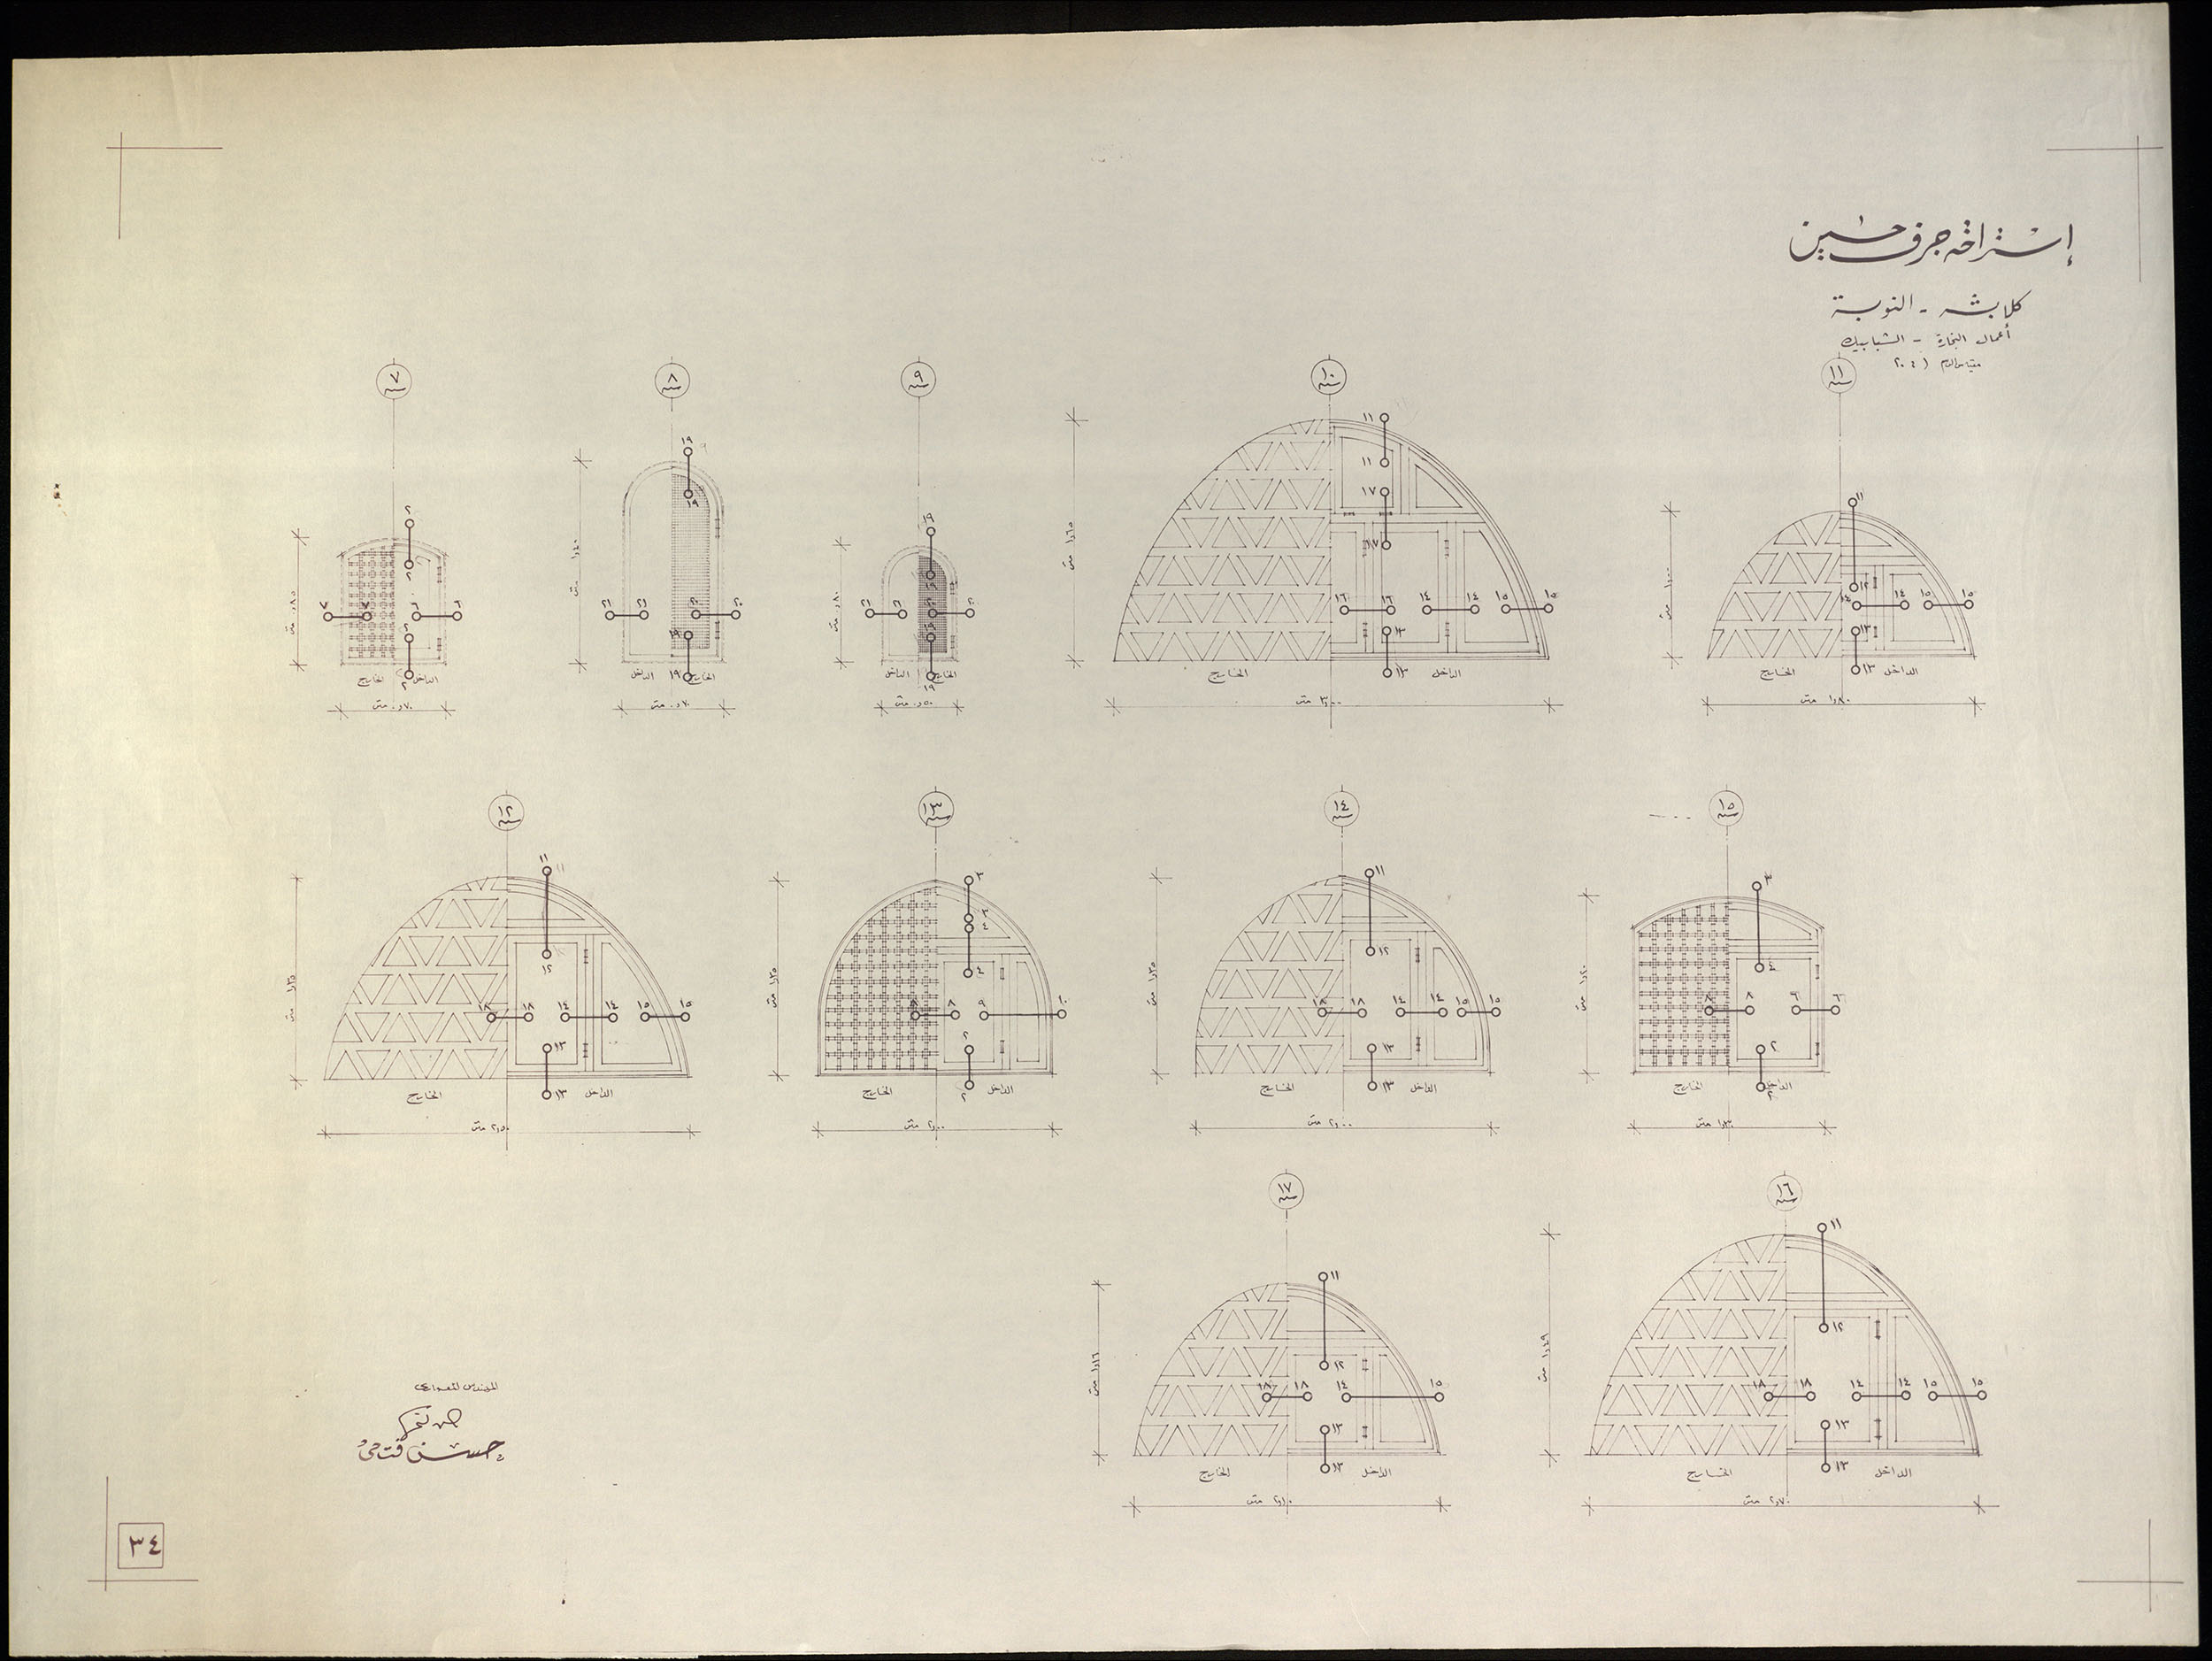 Woodwork details. Interior and exterior detail drawing of wooden shababik (windows).